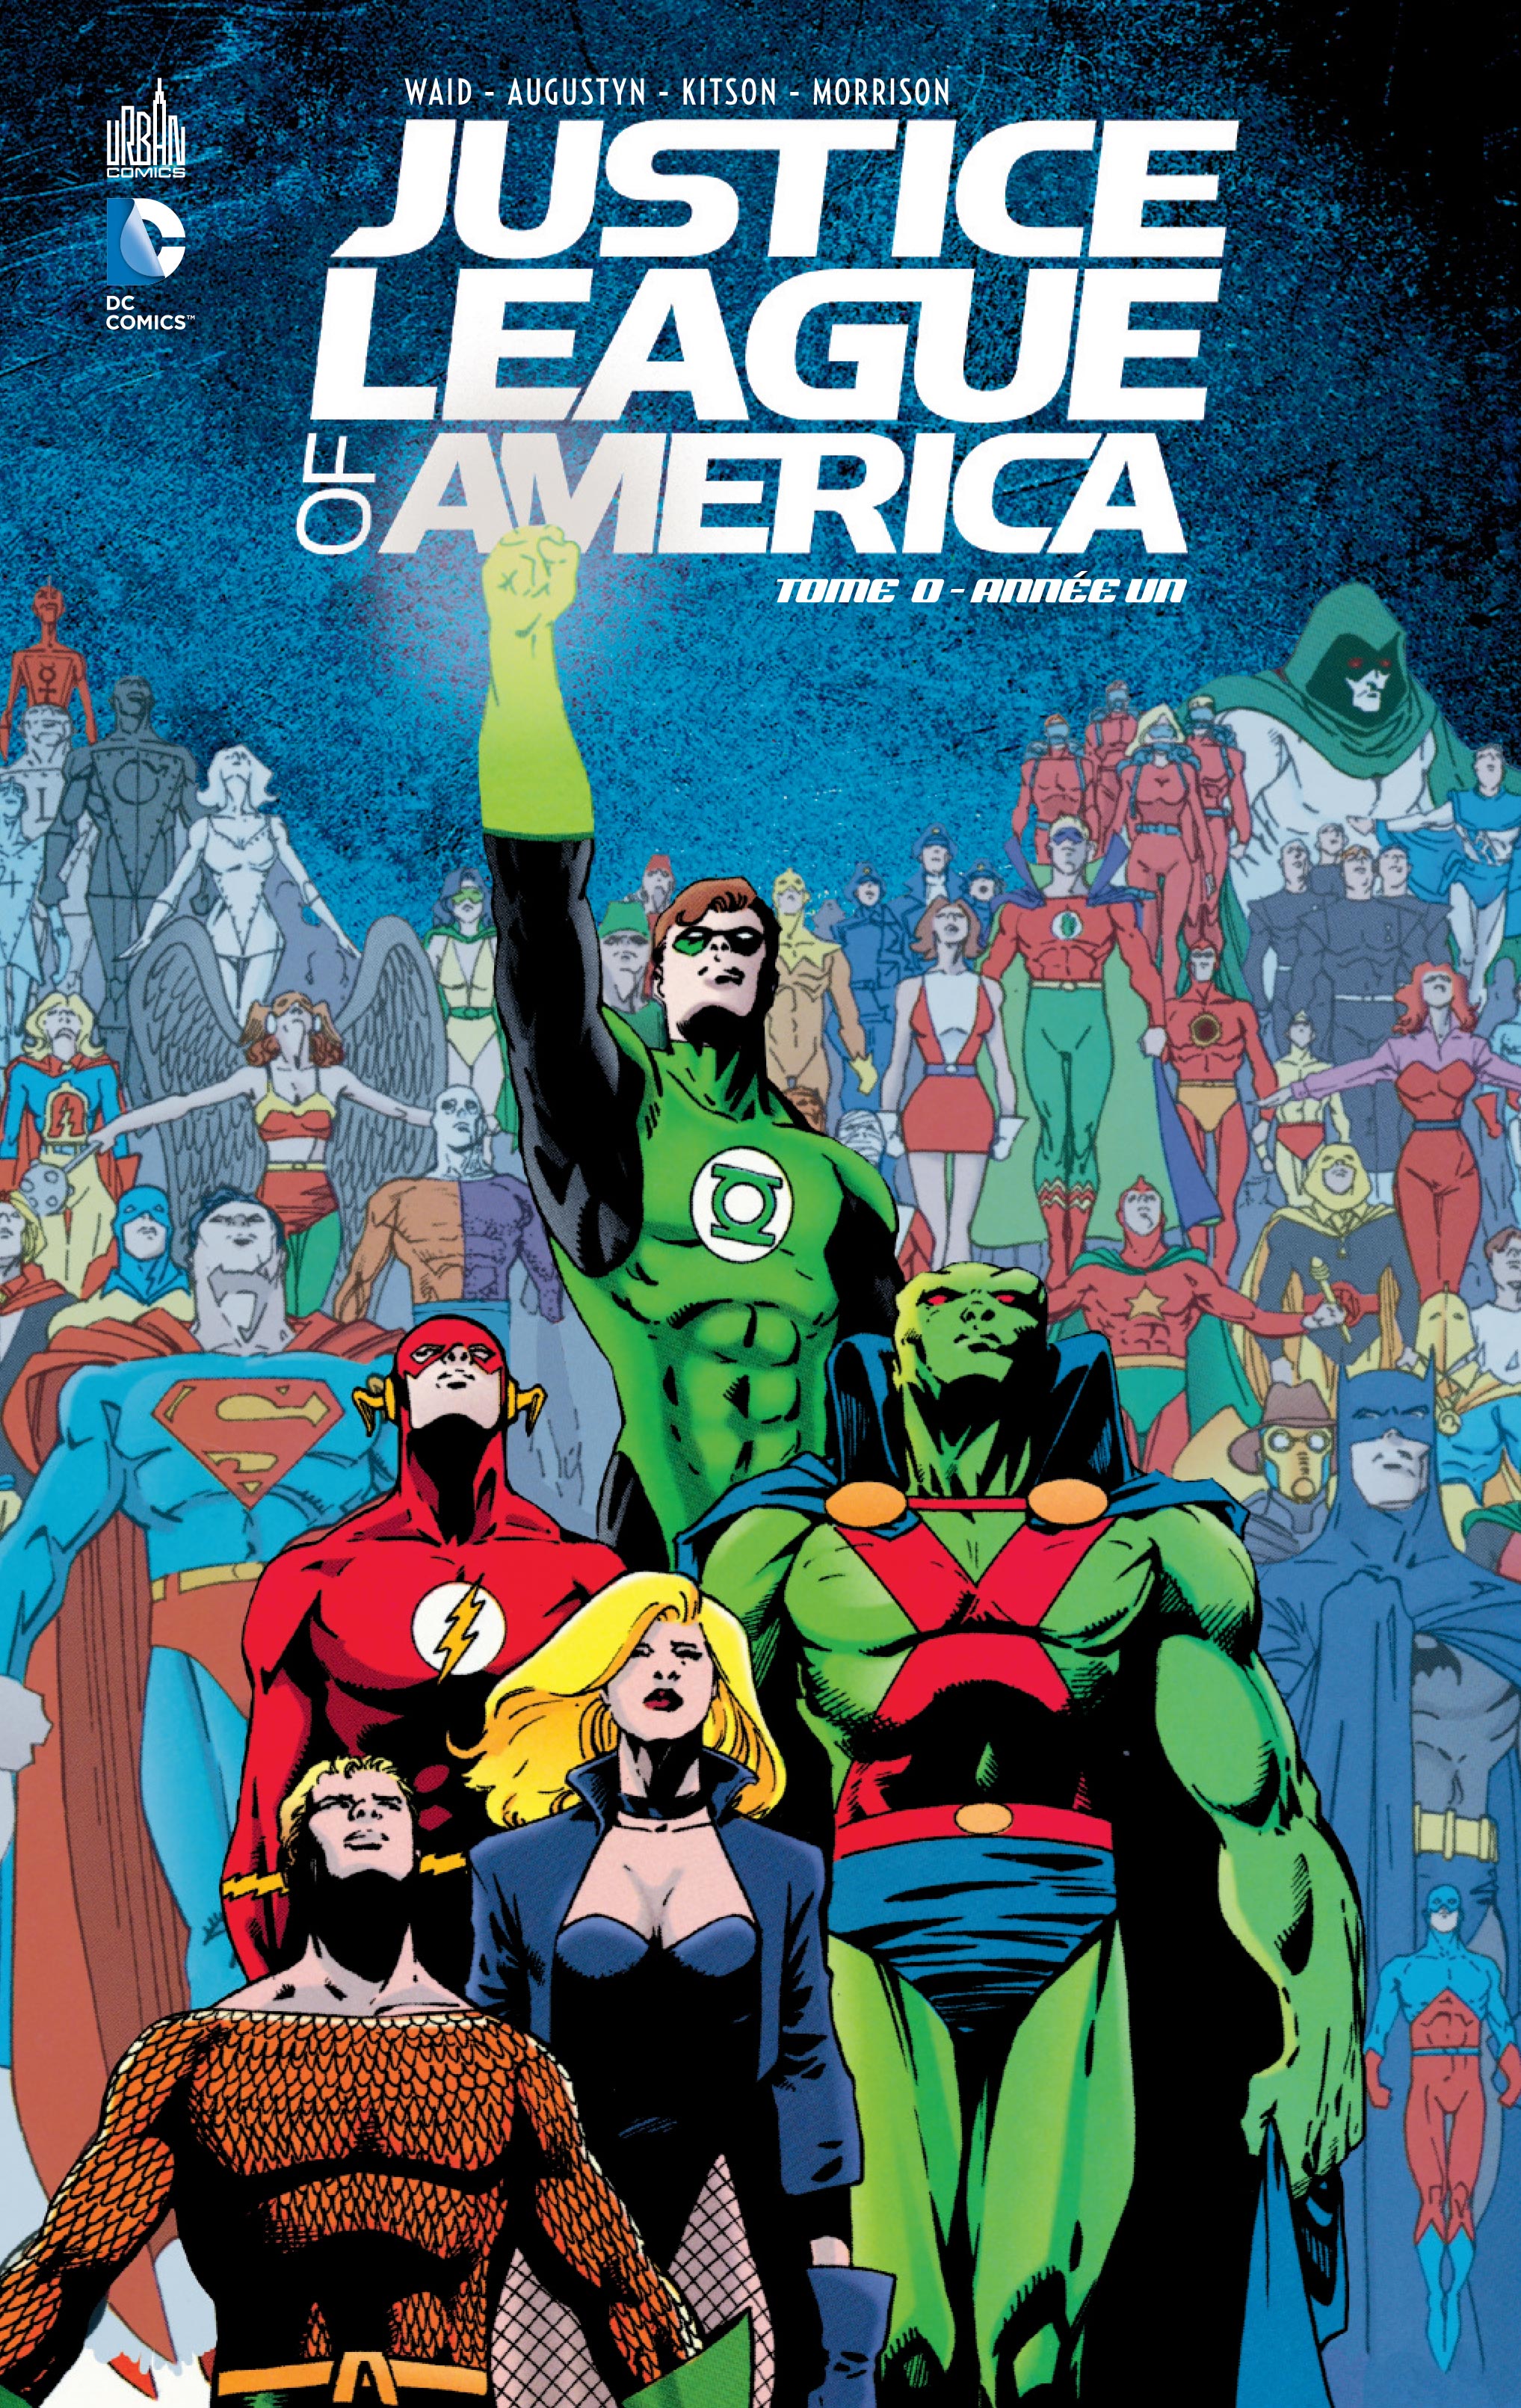 Justice League of America tome 0 - couv